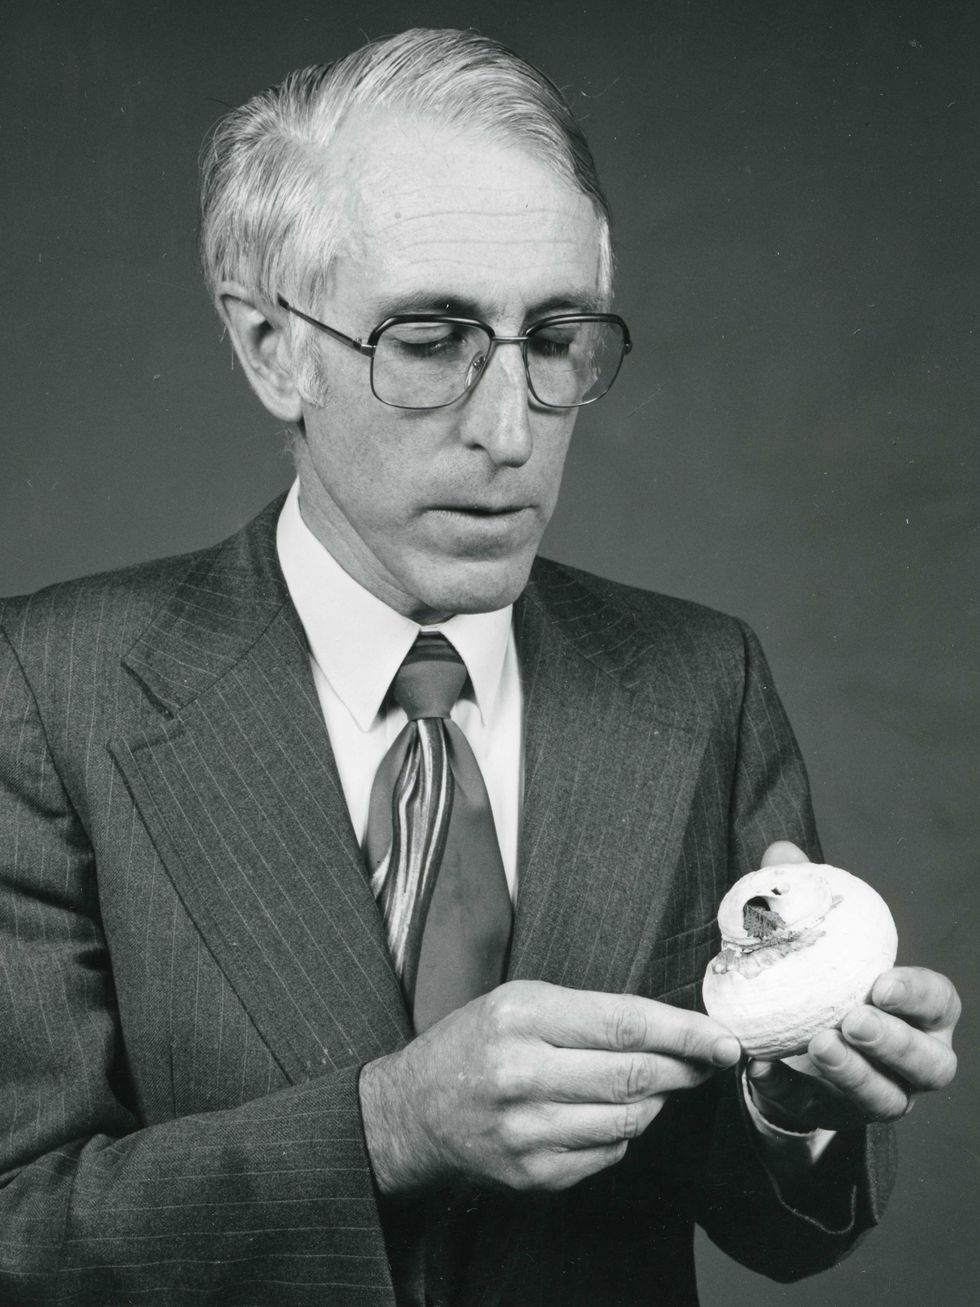 A white-haired man holds a white seashell.